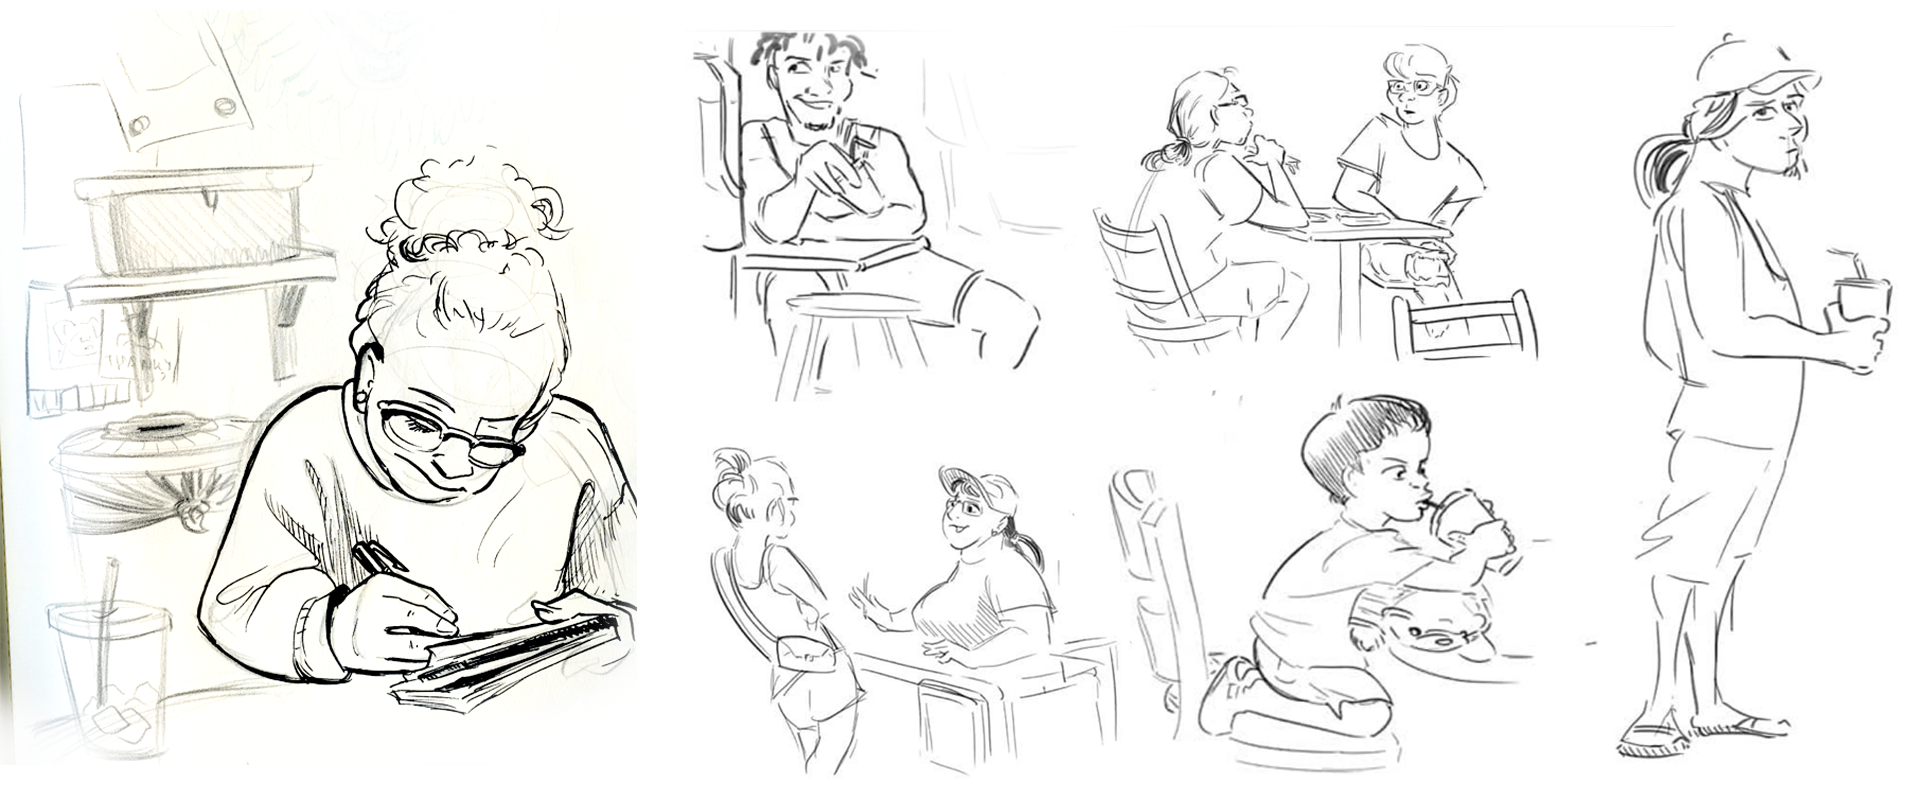 Cafesketches_comp_3.png